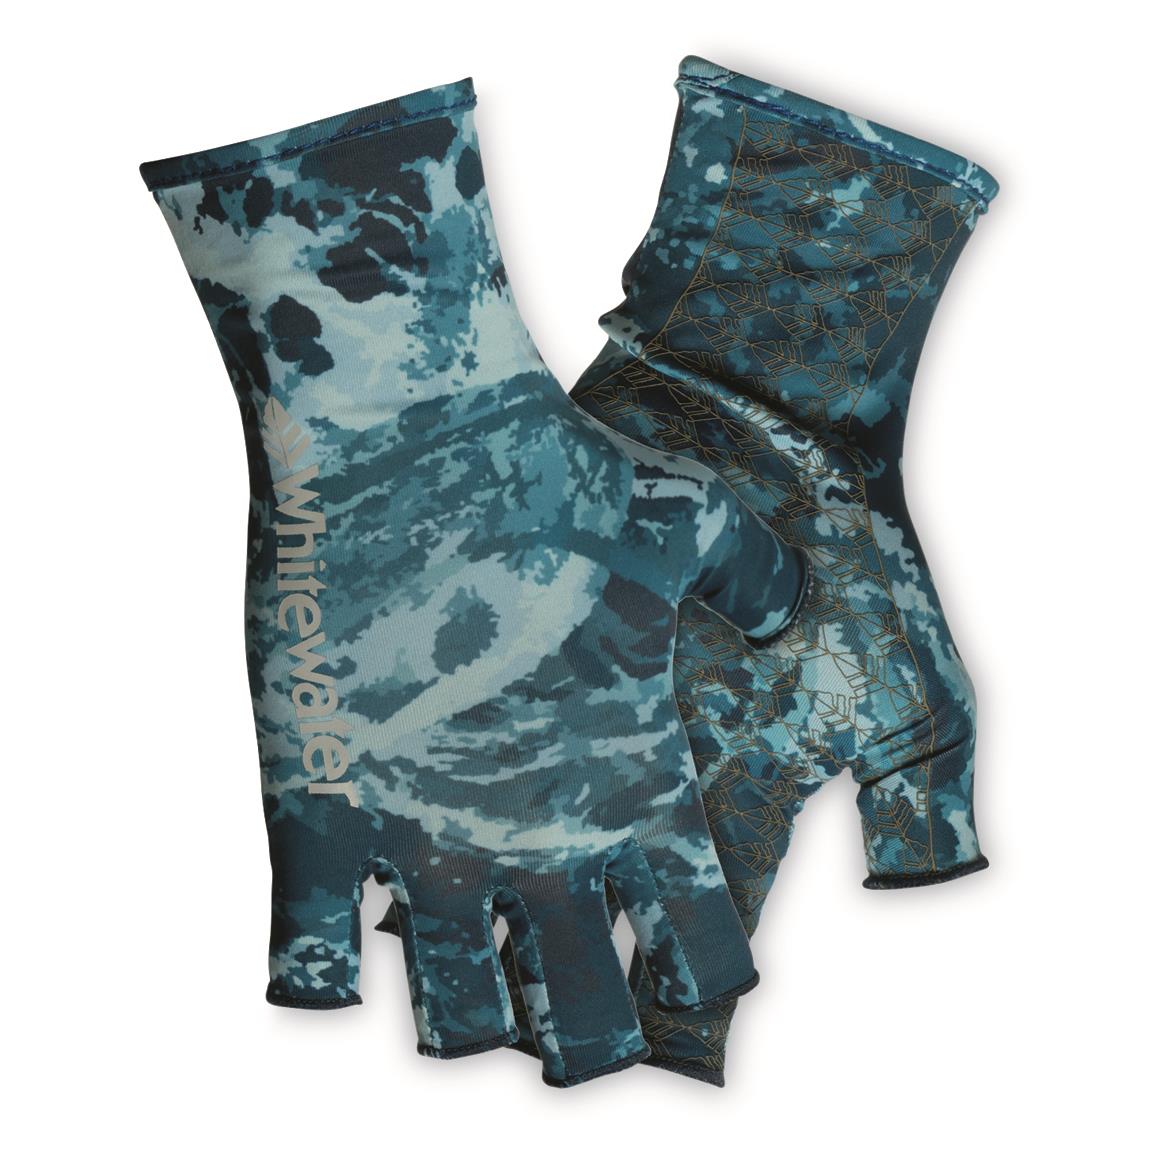 AFTCO Helm Insulated Fishing Gloves - 731855, Gloves & Mittens at